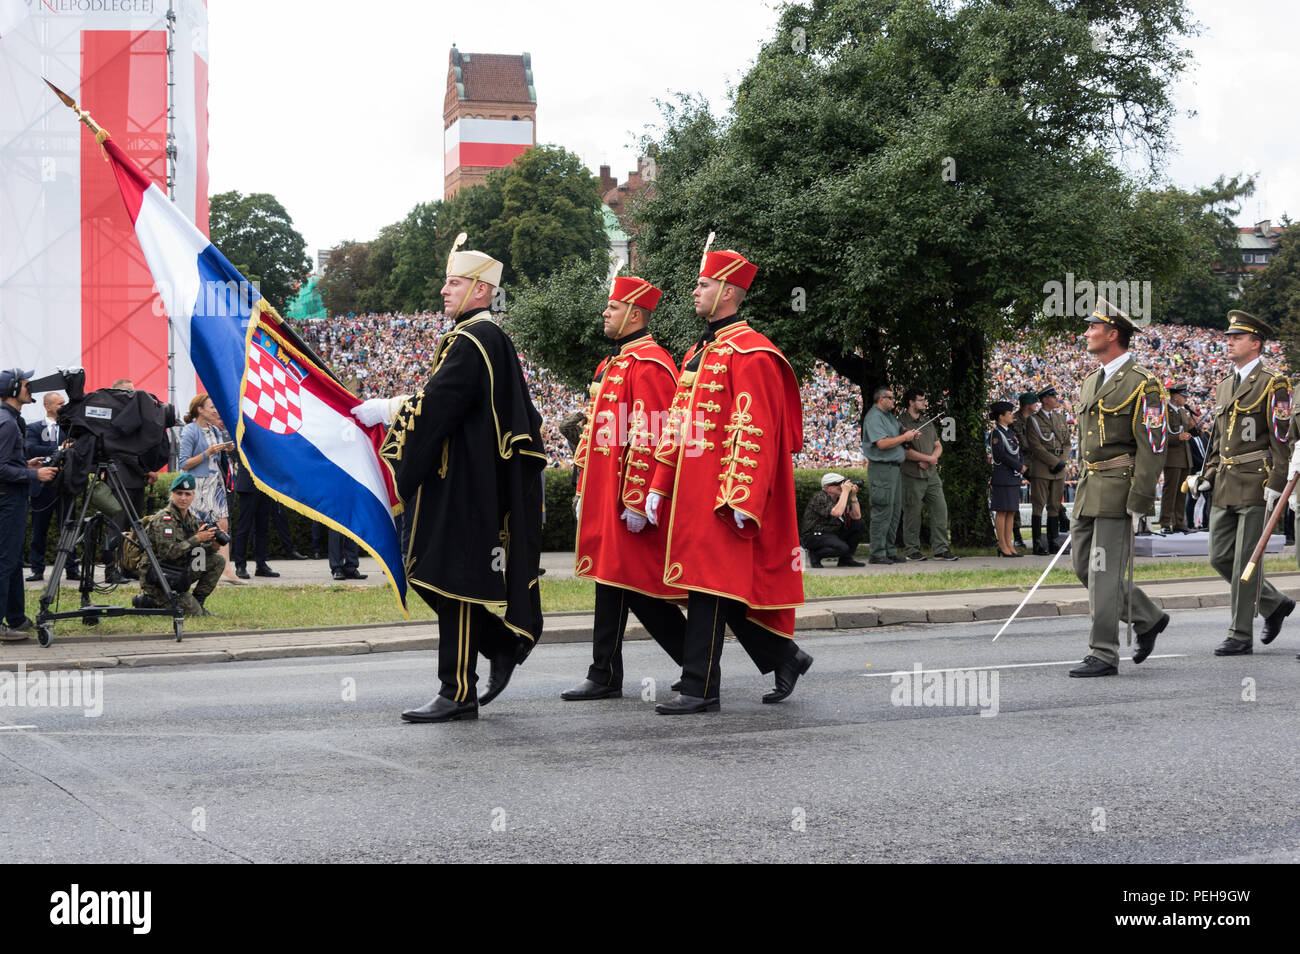 Soldiers from the NATO multinational battle group stationed in Poland during the annual military parade in the Poland's capital city Stock Photo